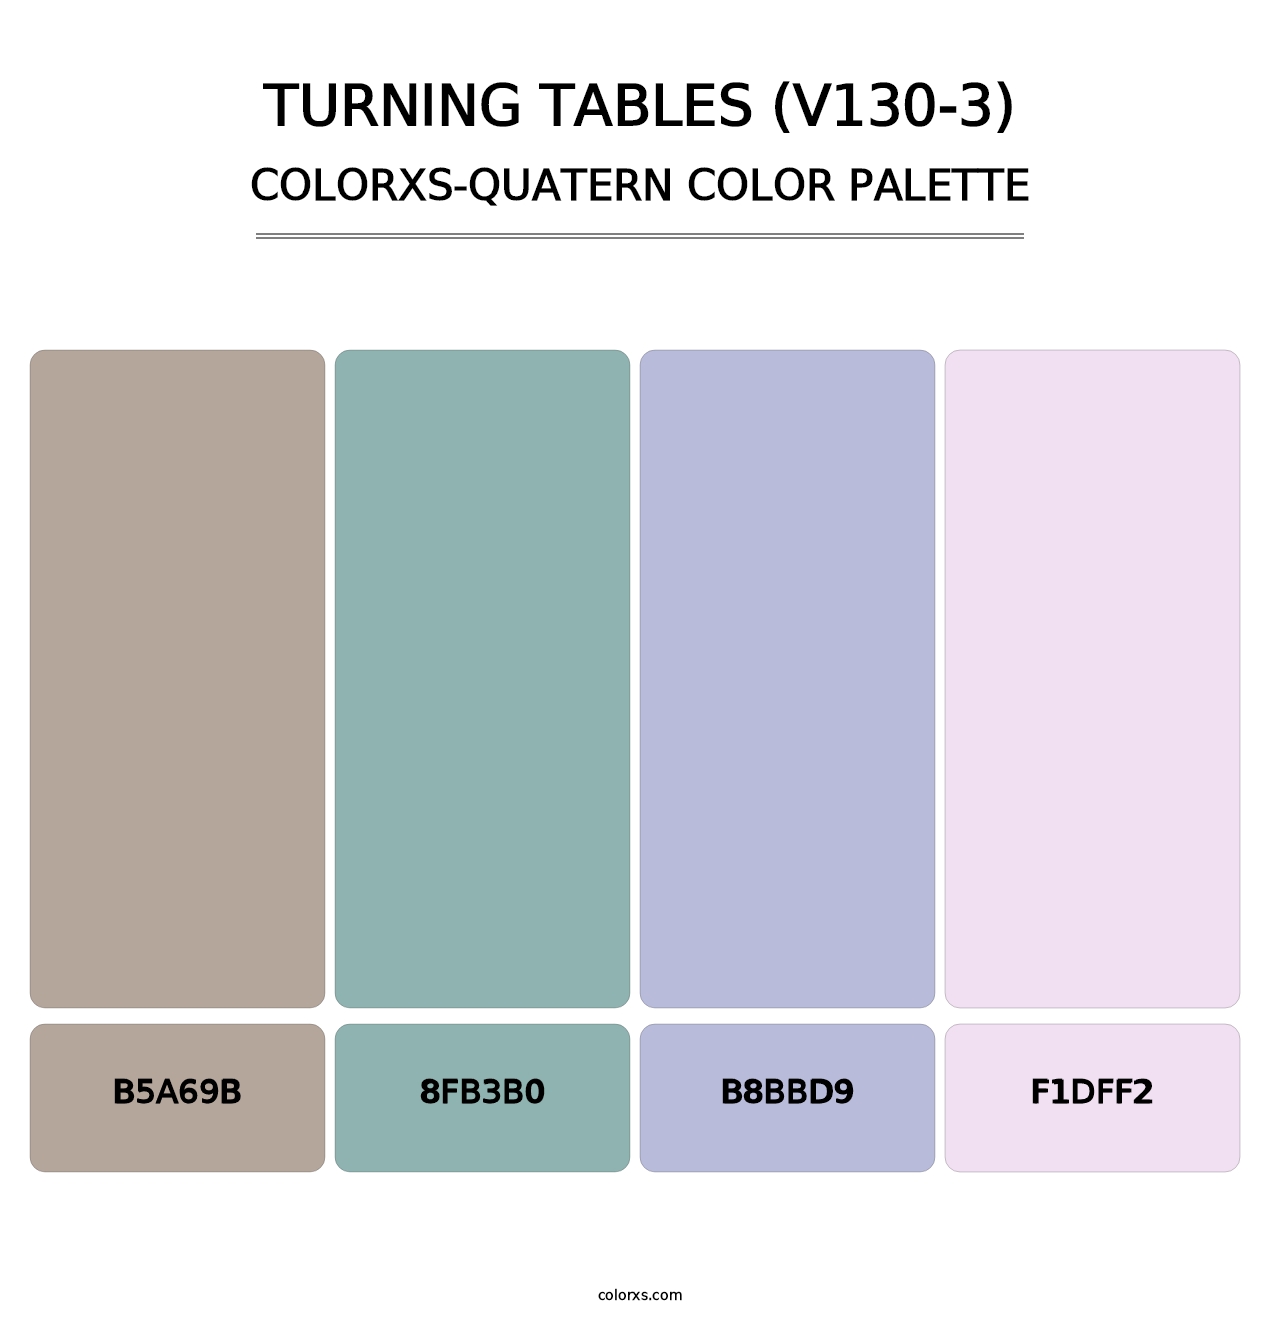 Turning Tables (V130-3) - Colorxs Quatern Palette